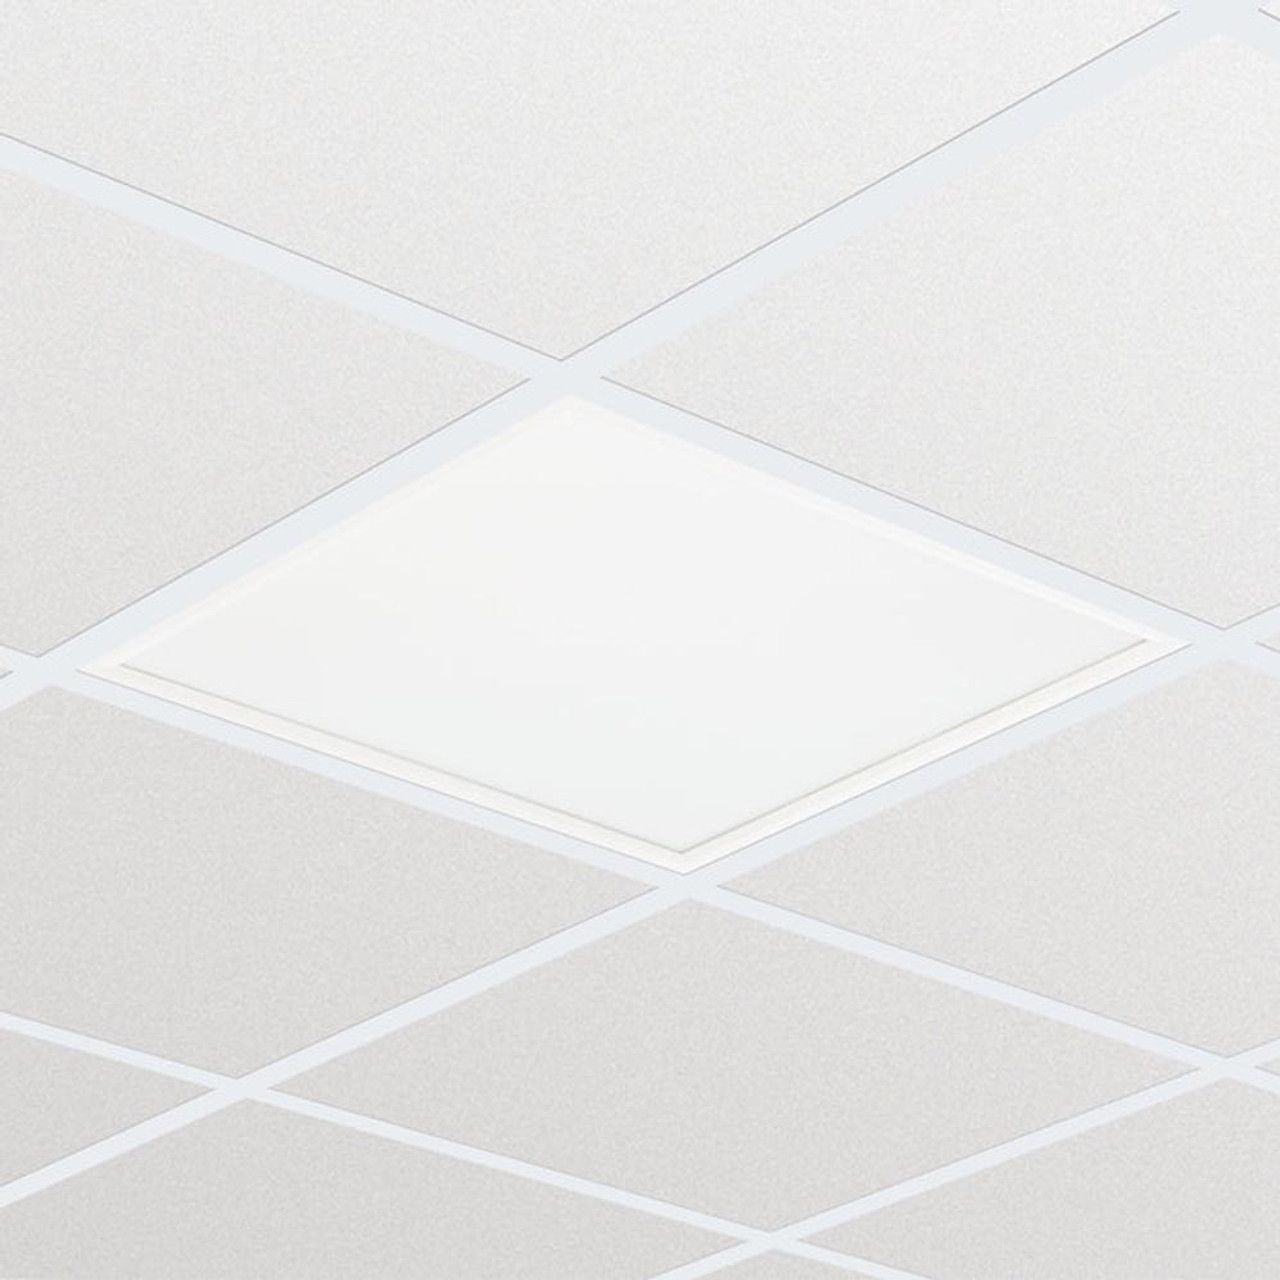 CoreLine 2ft x 2ft LED Panel Cool White 29W 3600lm Recessed UGR<19 TP(a)